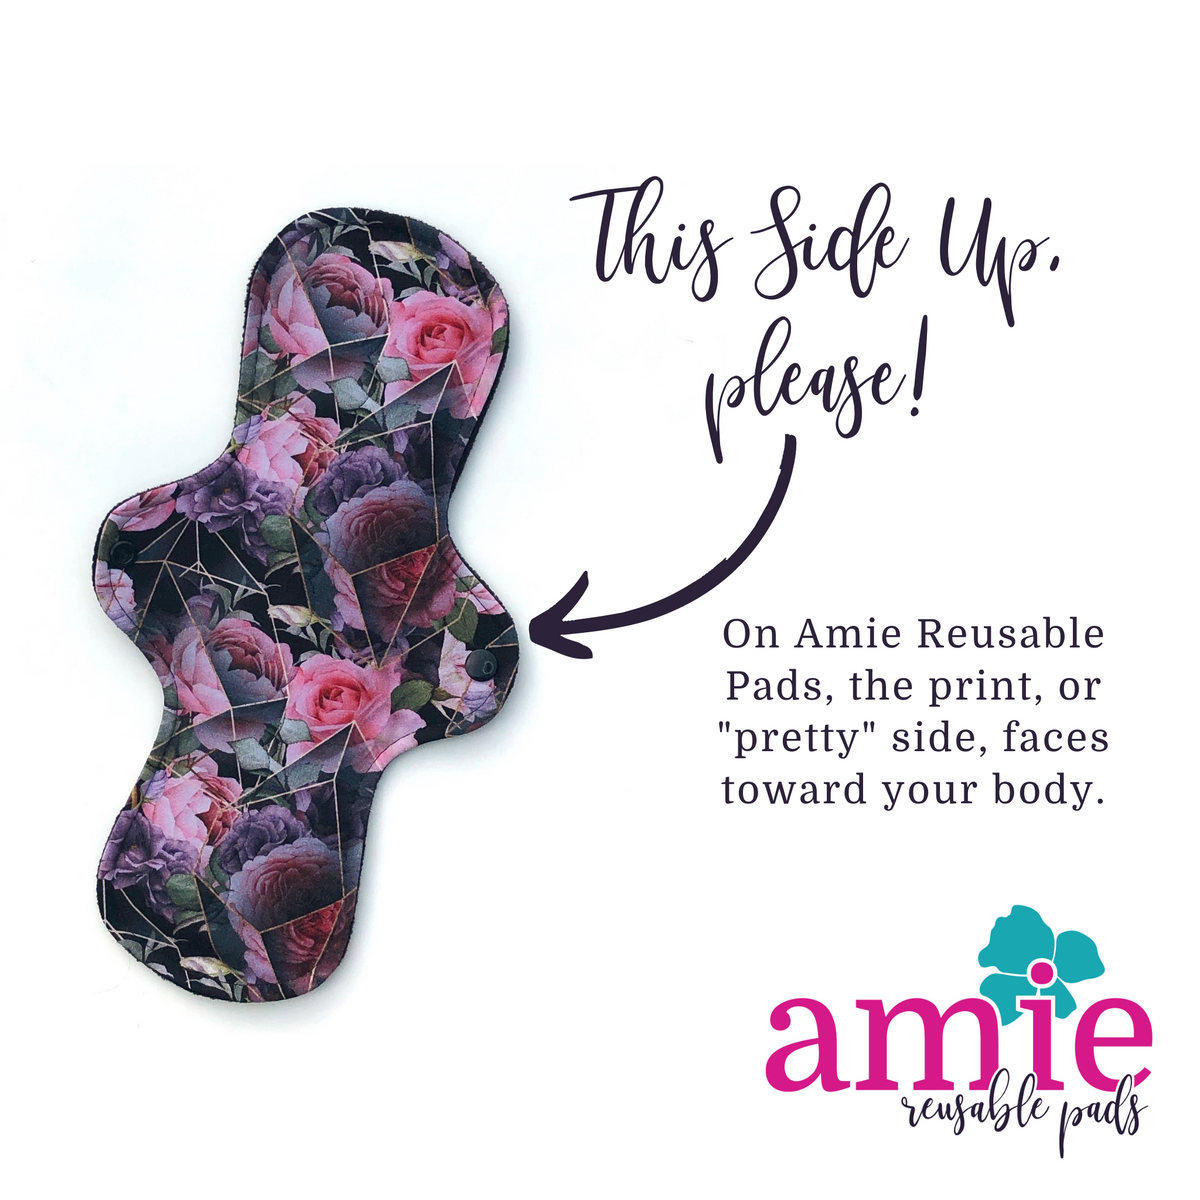 instructions showing to place the pretty side of our pads facing the body words this side up please pointing to a reusable floral print pad